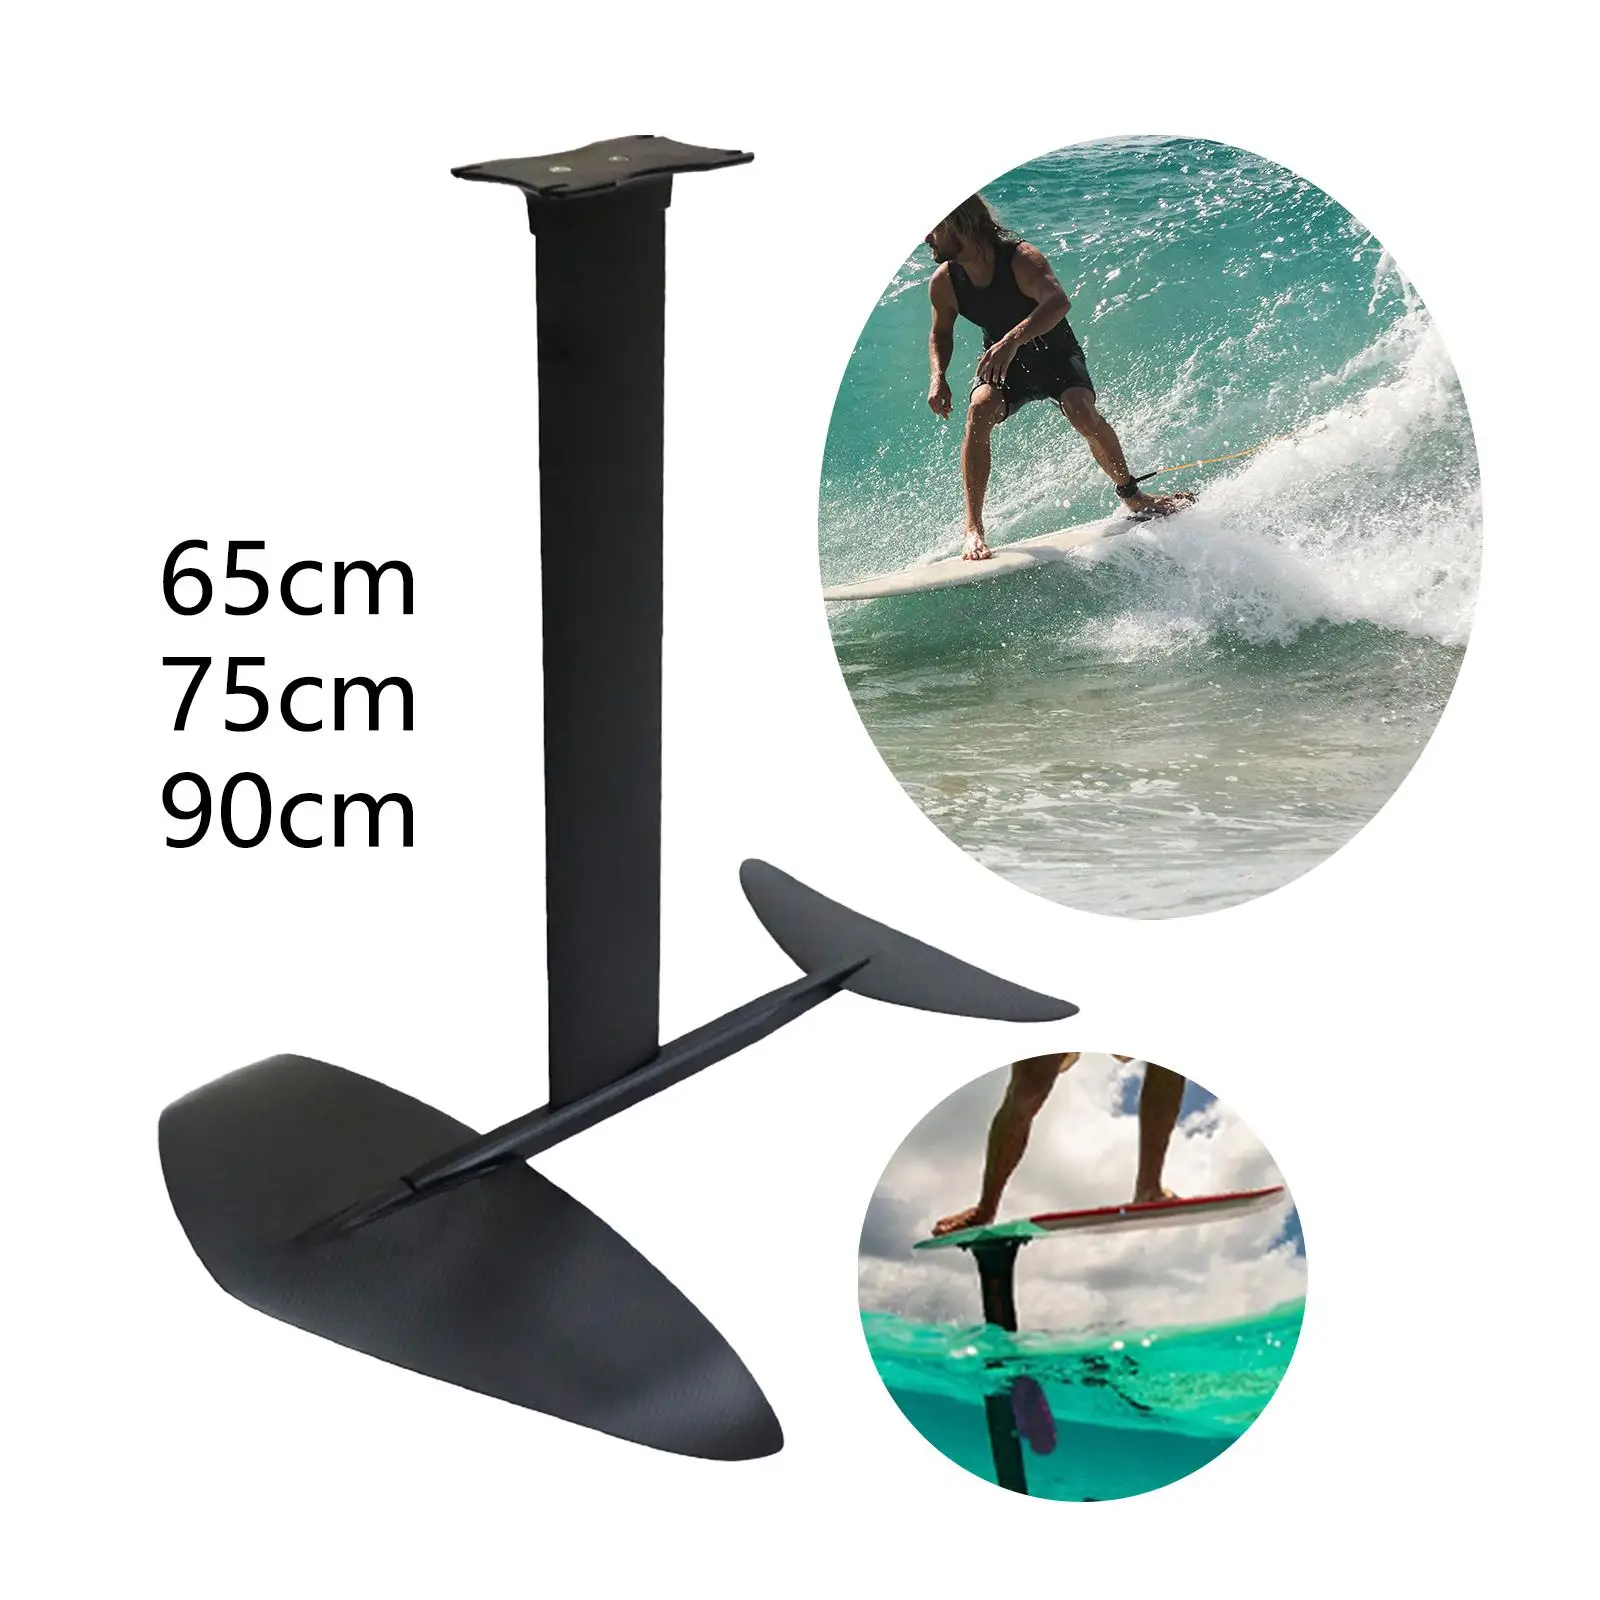 Surfboard Hydrofoil Strong for Outdoor Water Toy Surfing Lovers Paddle Board